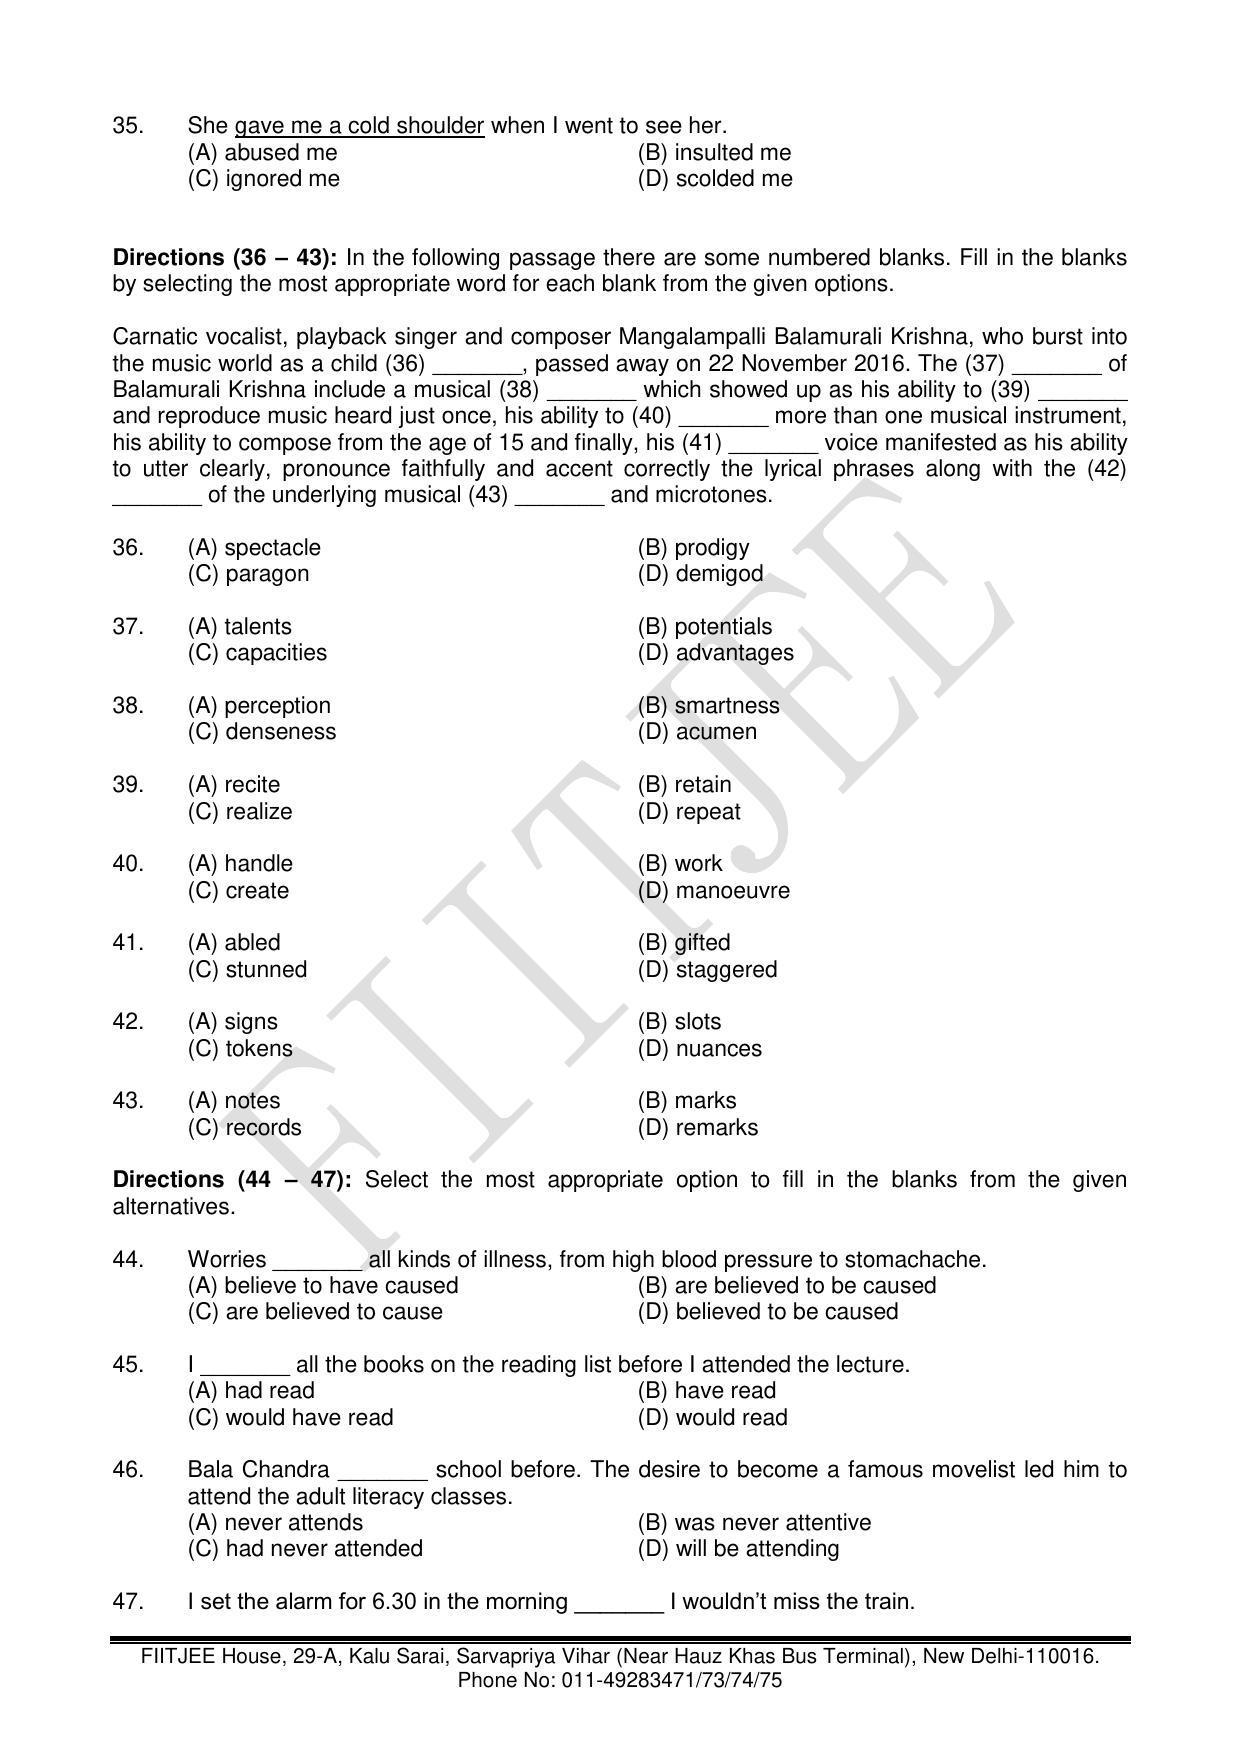 NTSE 2017 (Stage II) Language (LCT) Question Paper (May 14, 2017) - Page 7